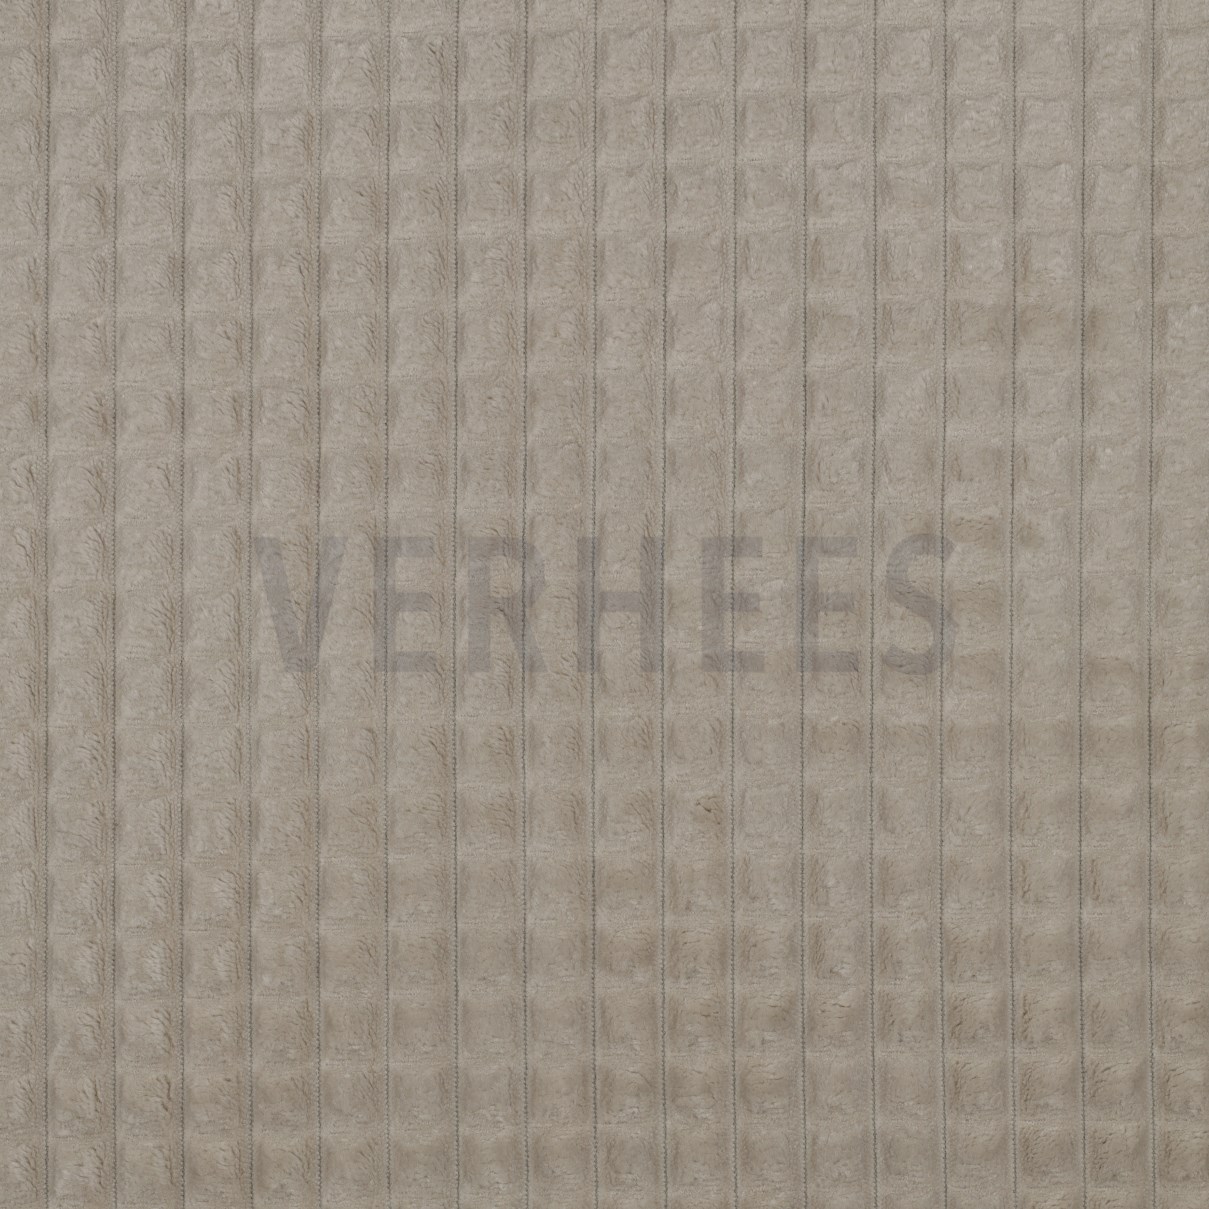 VELOURS DECO SQUARE SAND (high resolution)